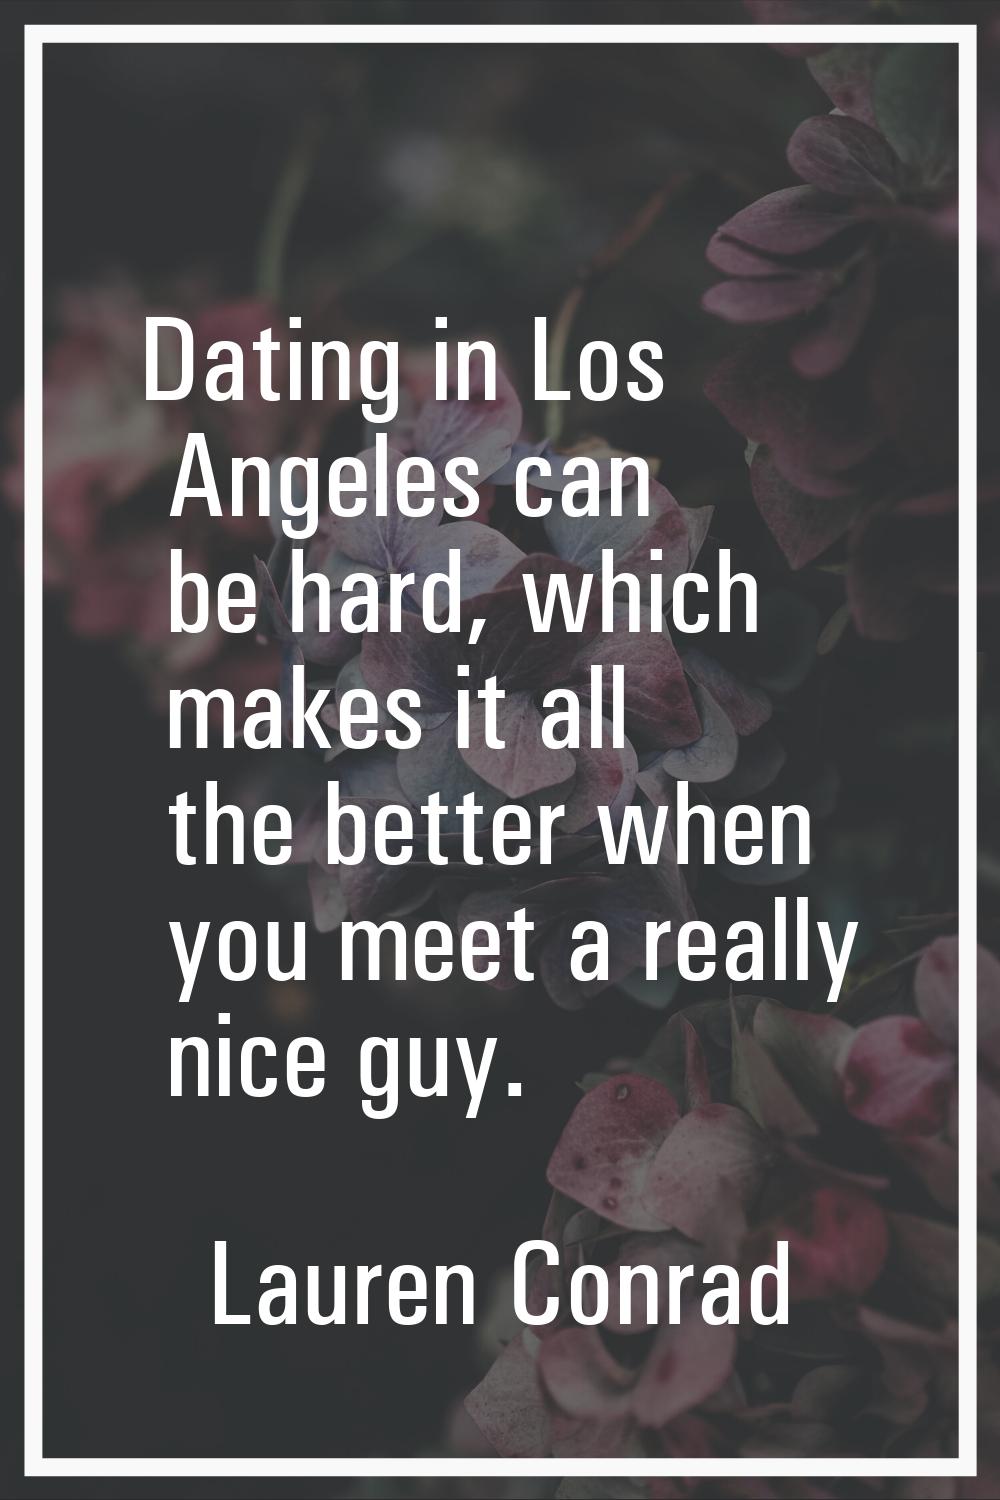 Dating in Los Angeles can be hard, which makes it all the better when you meet a really nice guy.